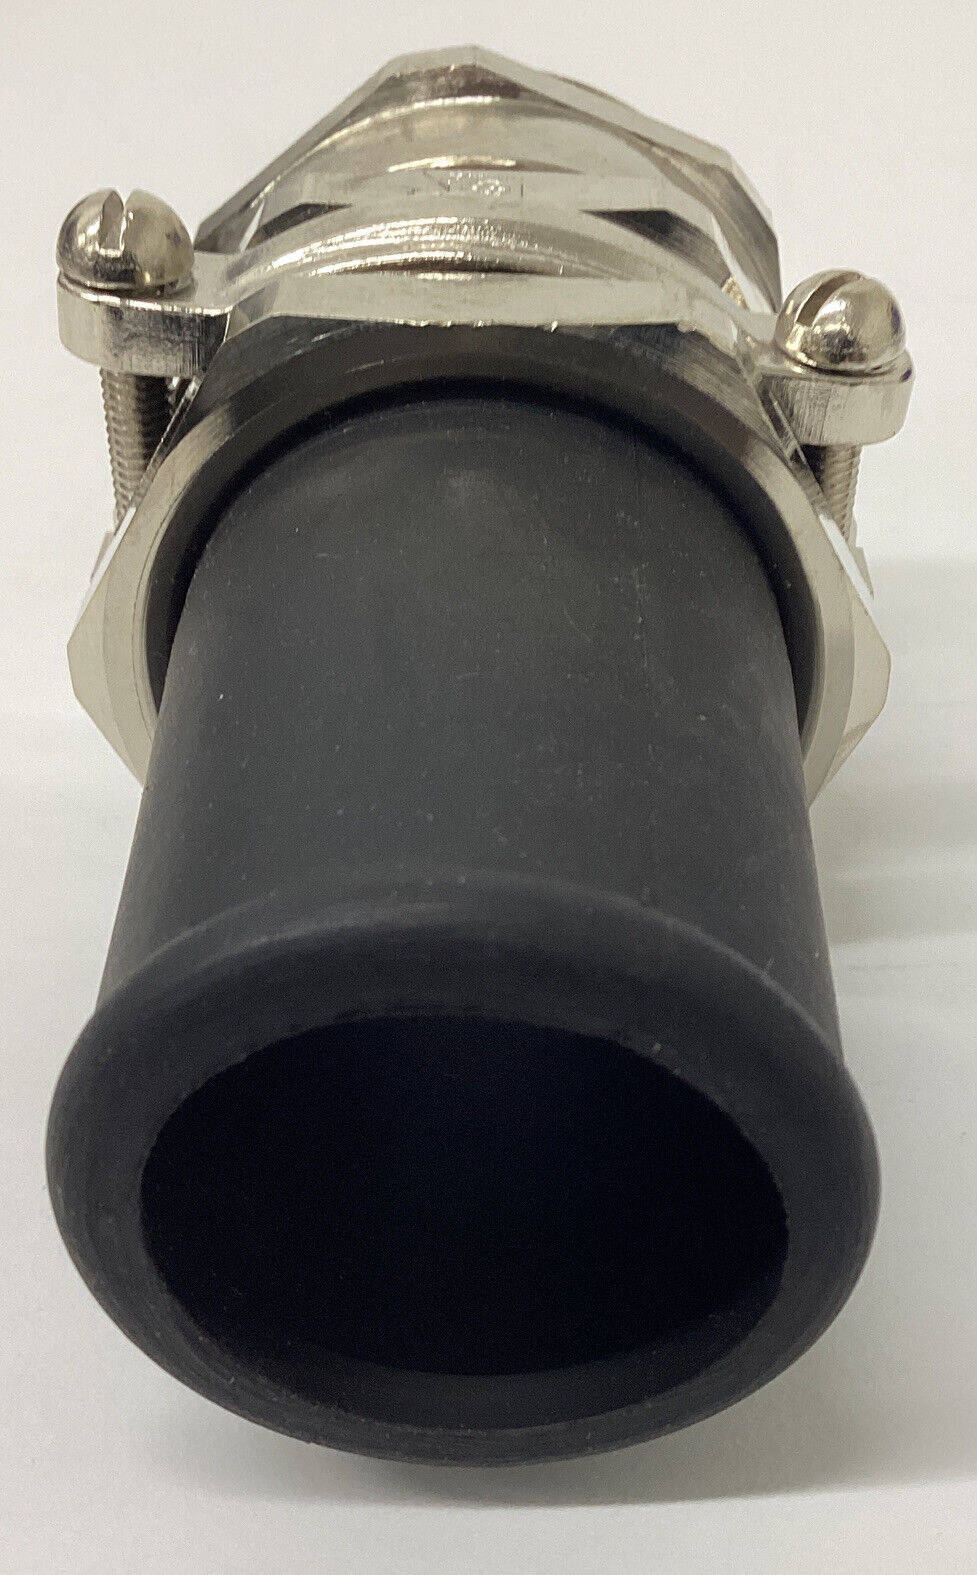 Lapp 12.9618 Strain Relief Cable Gland (YE253)